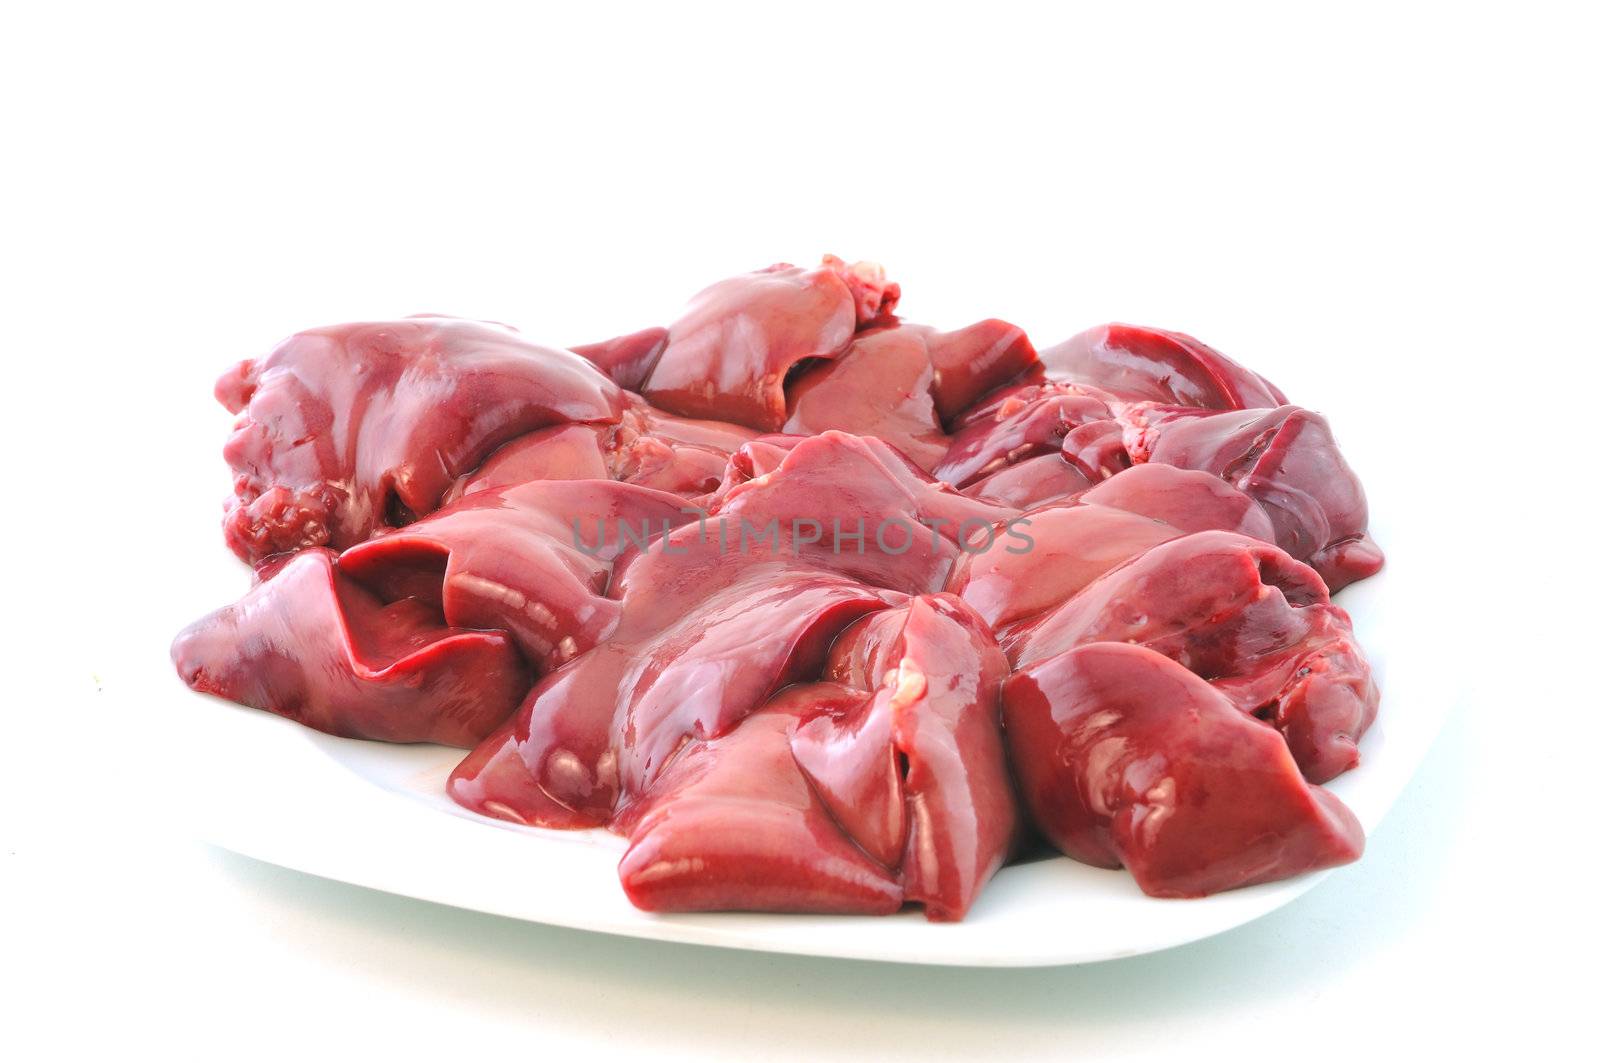 Fresh raw chicken liver lies on the plate against a white background